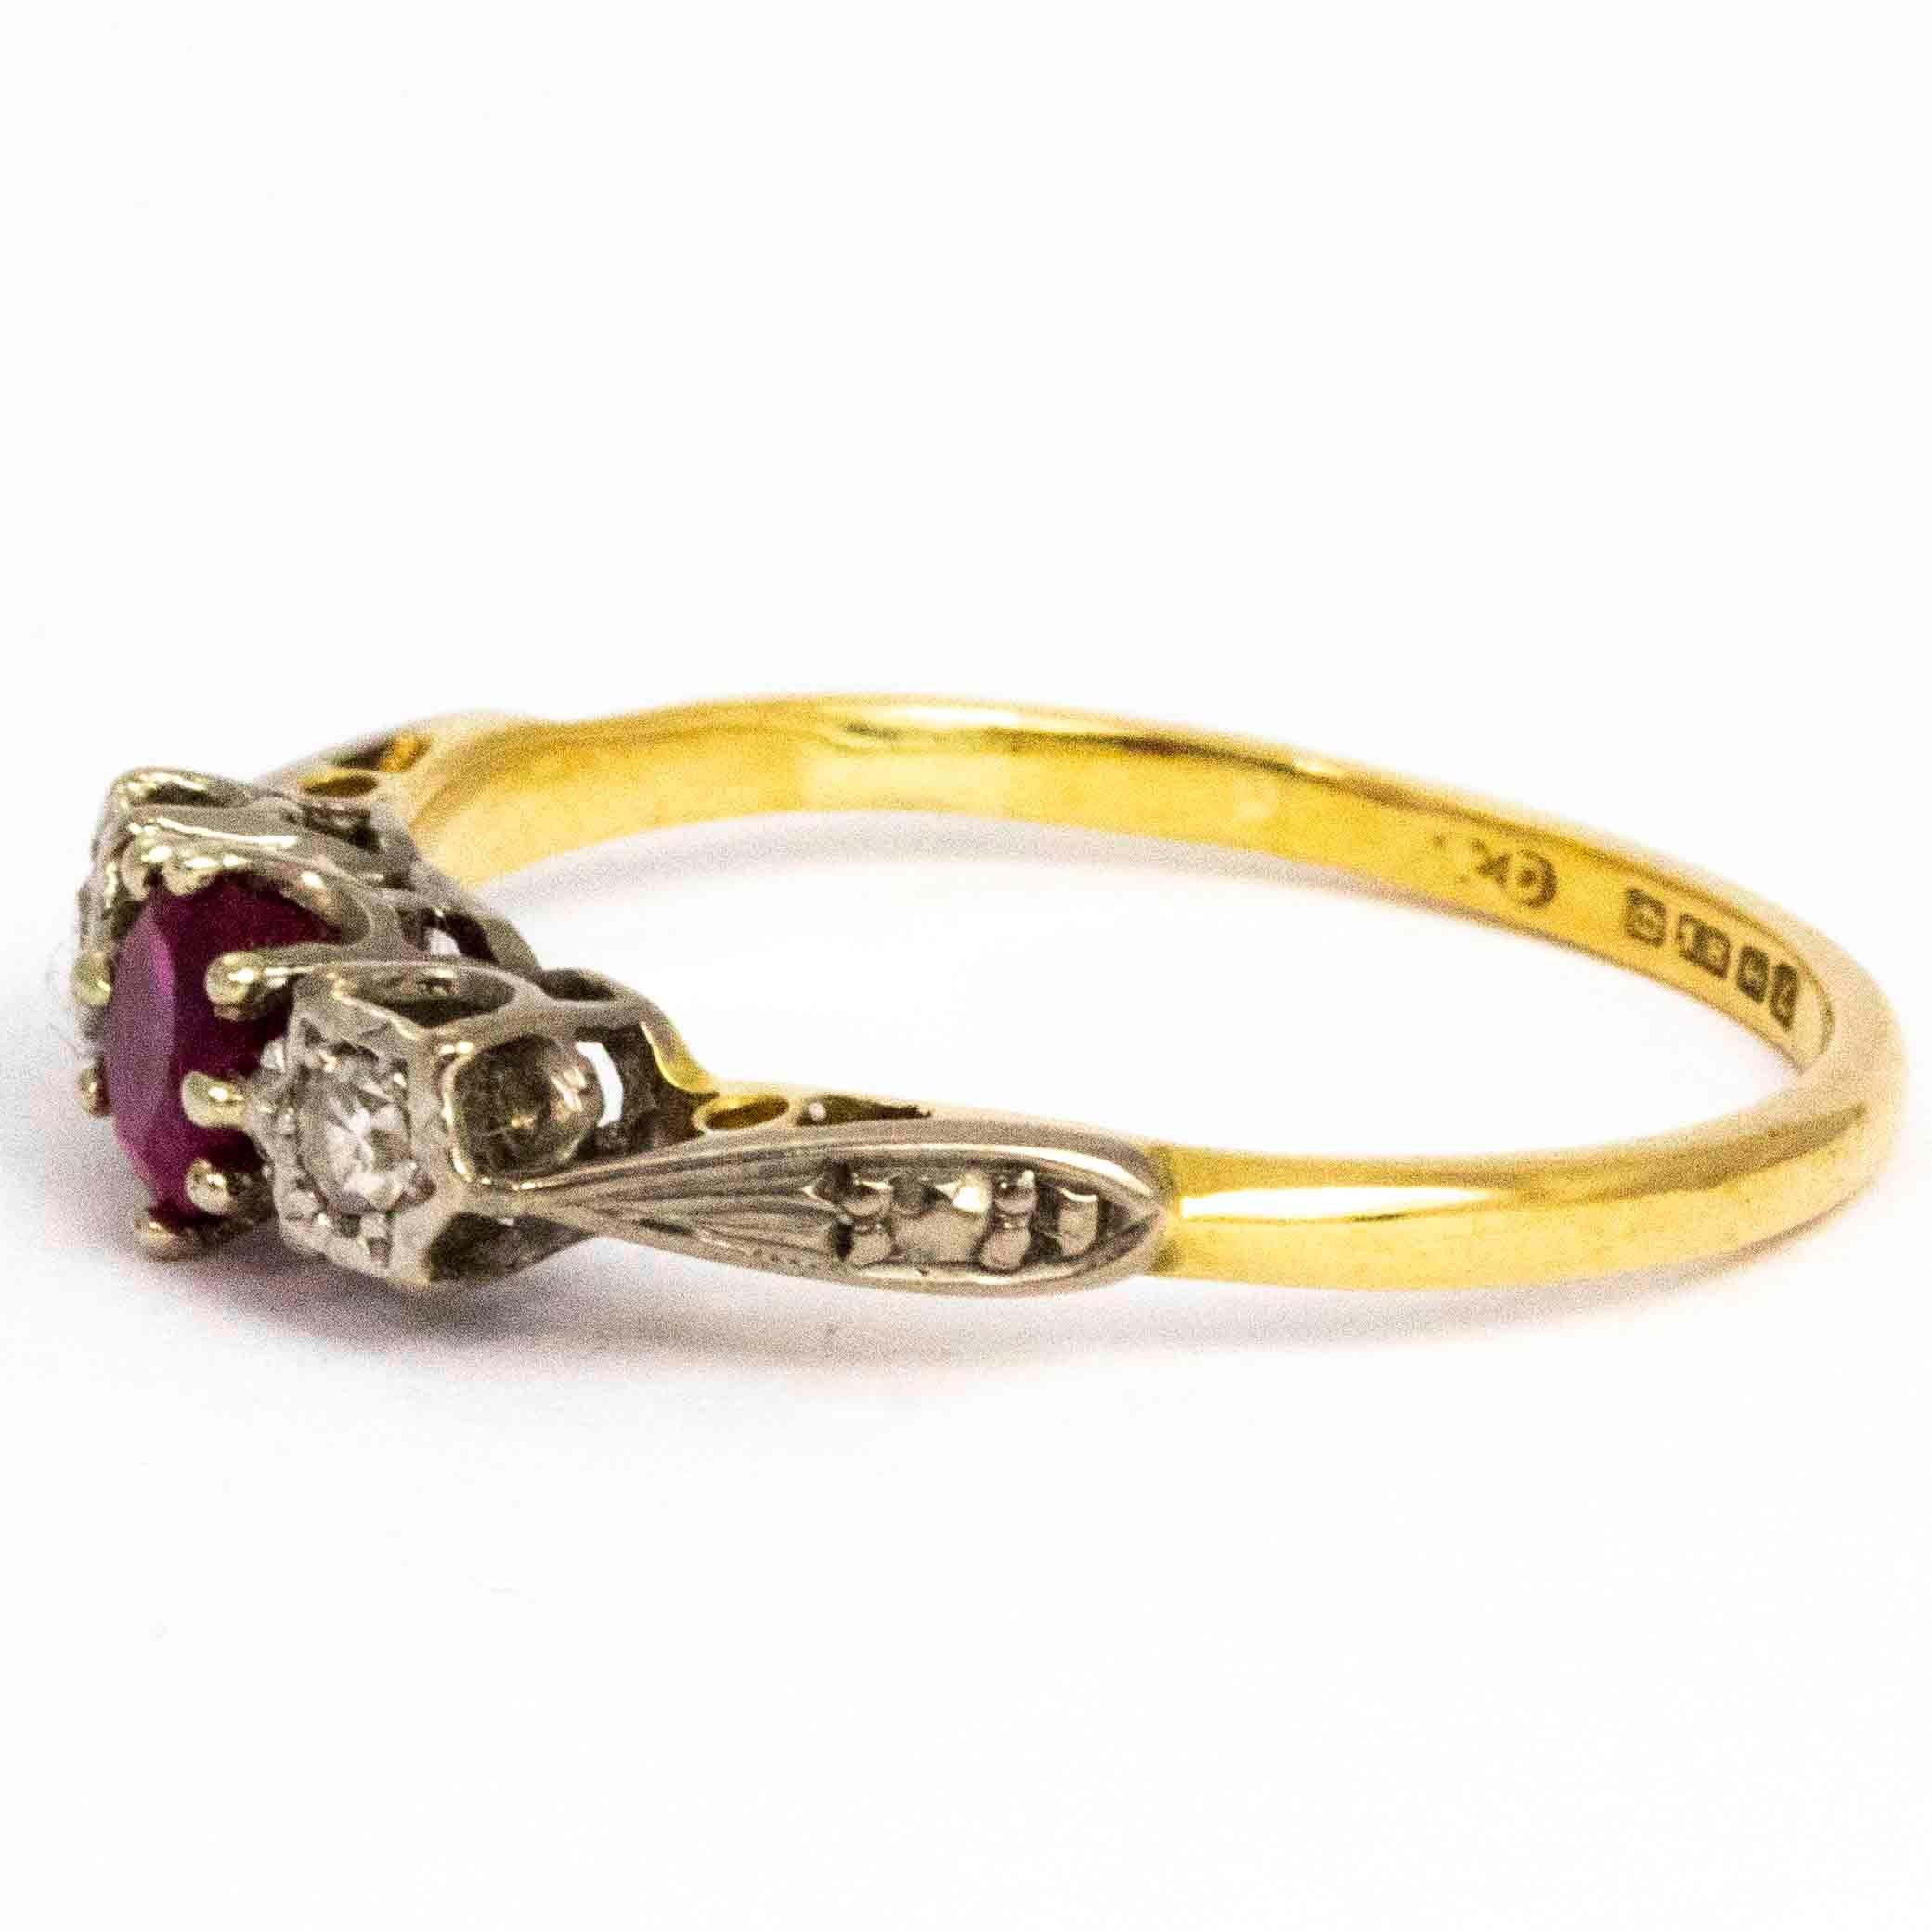 The ruby in this ring as the most wonderful deep pink colour which really pops next to the glistening diamonds. The ruby measures 25pts and the diamonds measure 5pts each. The diamonds and set in star settings and the ruby is held by a simple claw